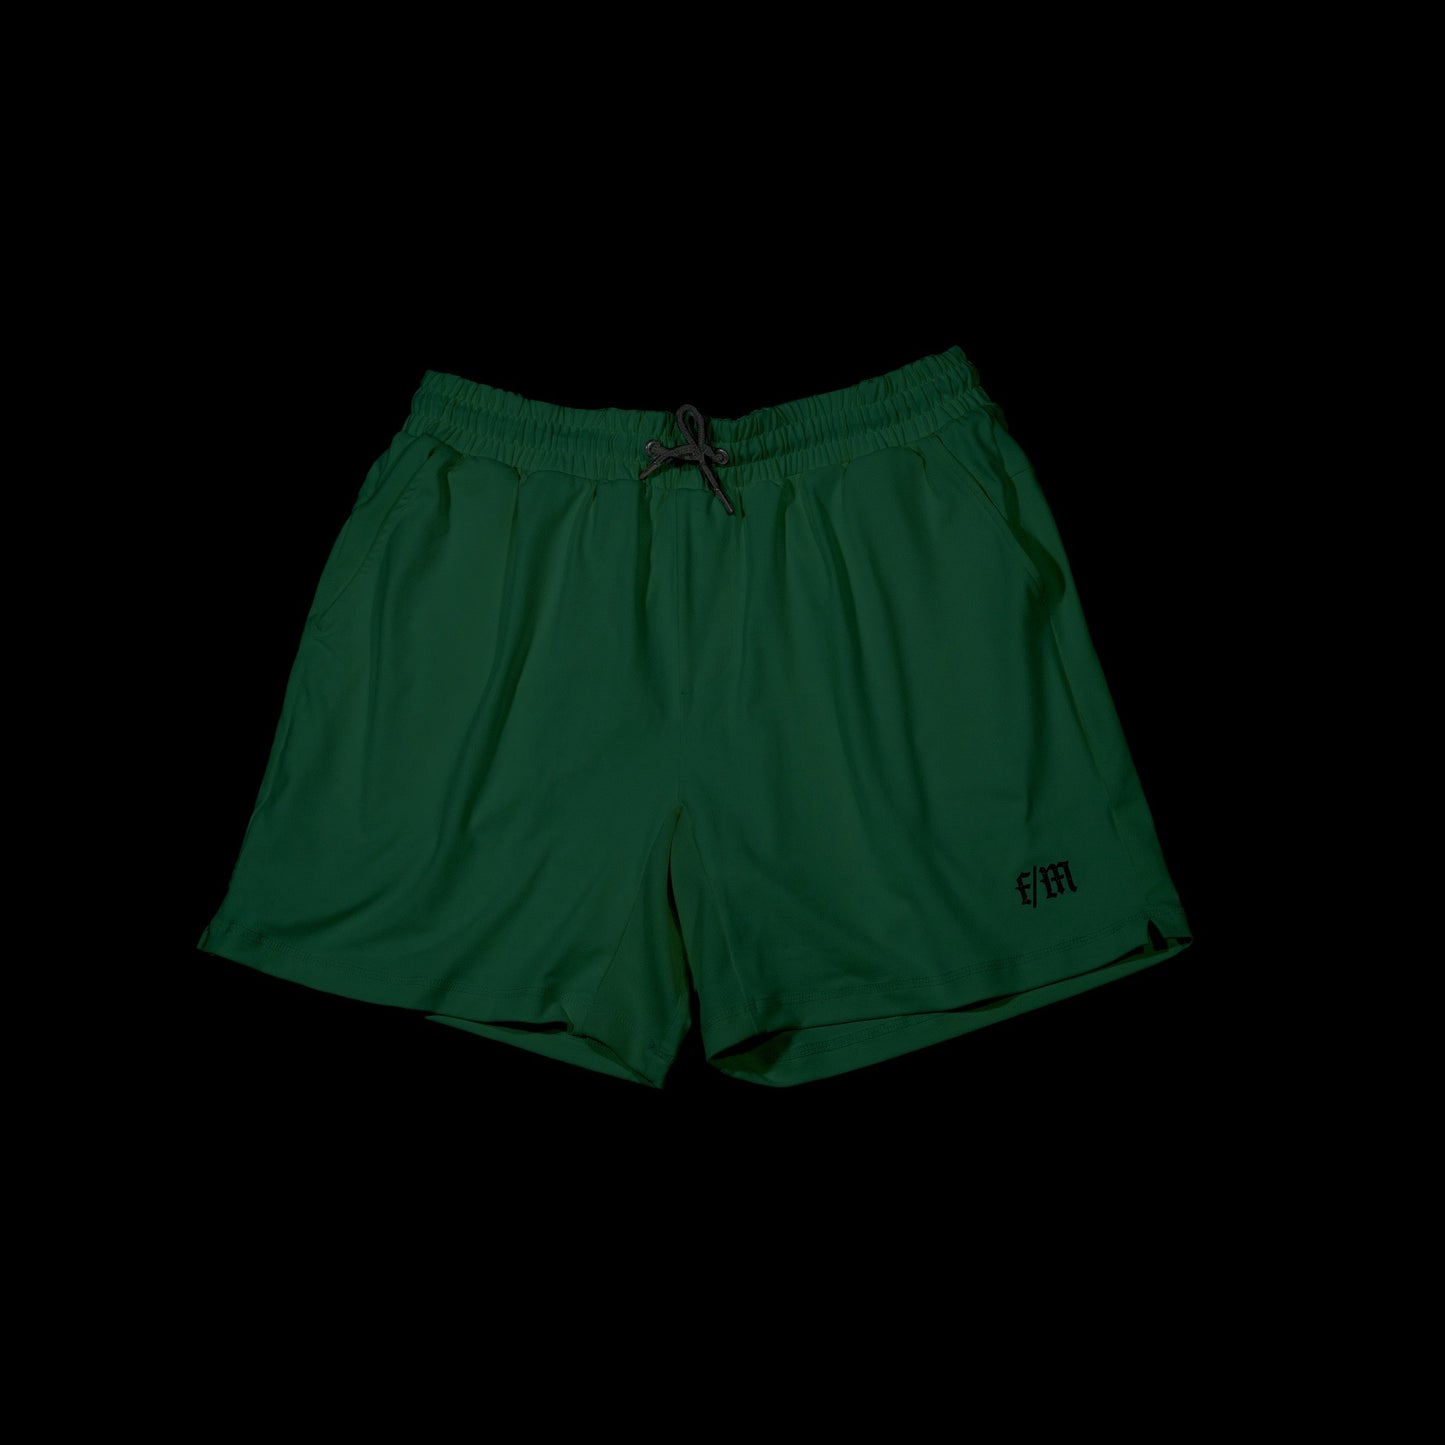 Concealed Carry Shorts - 5"